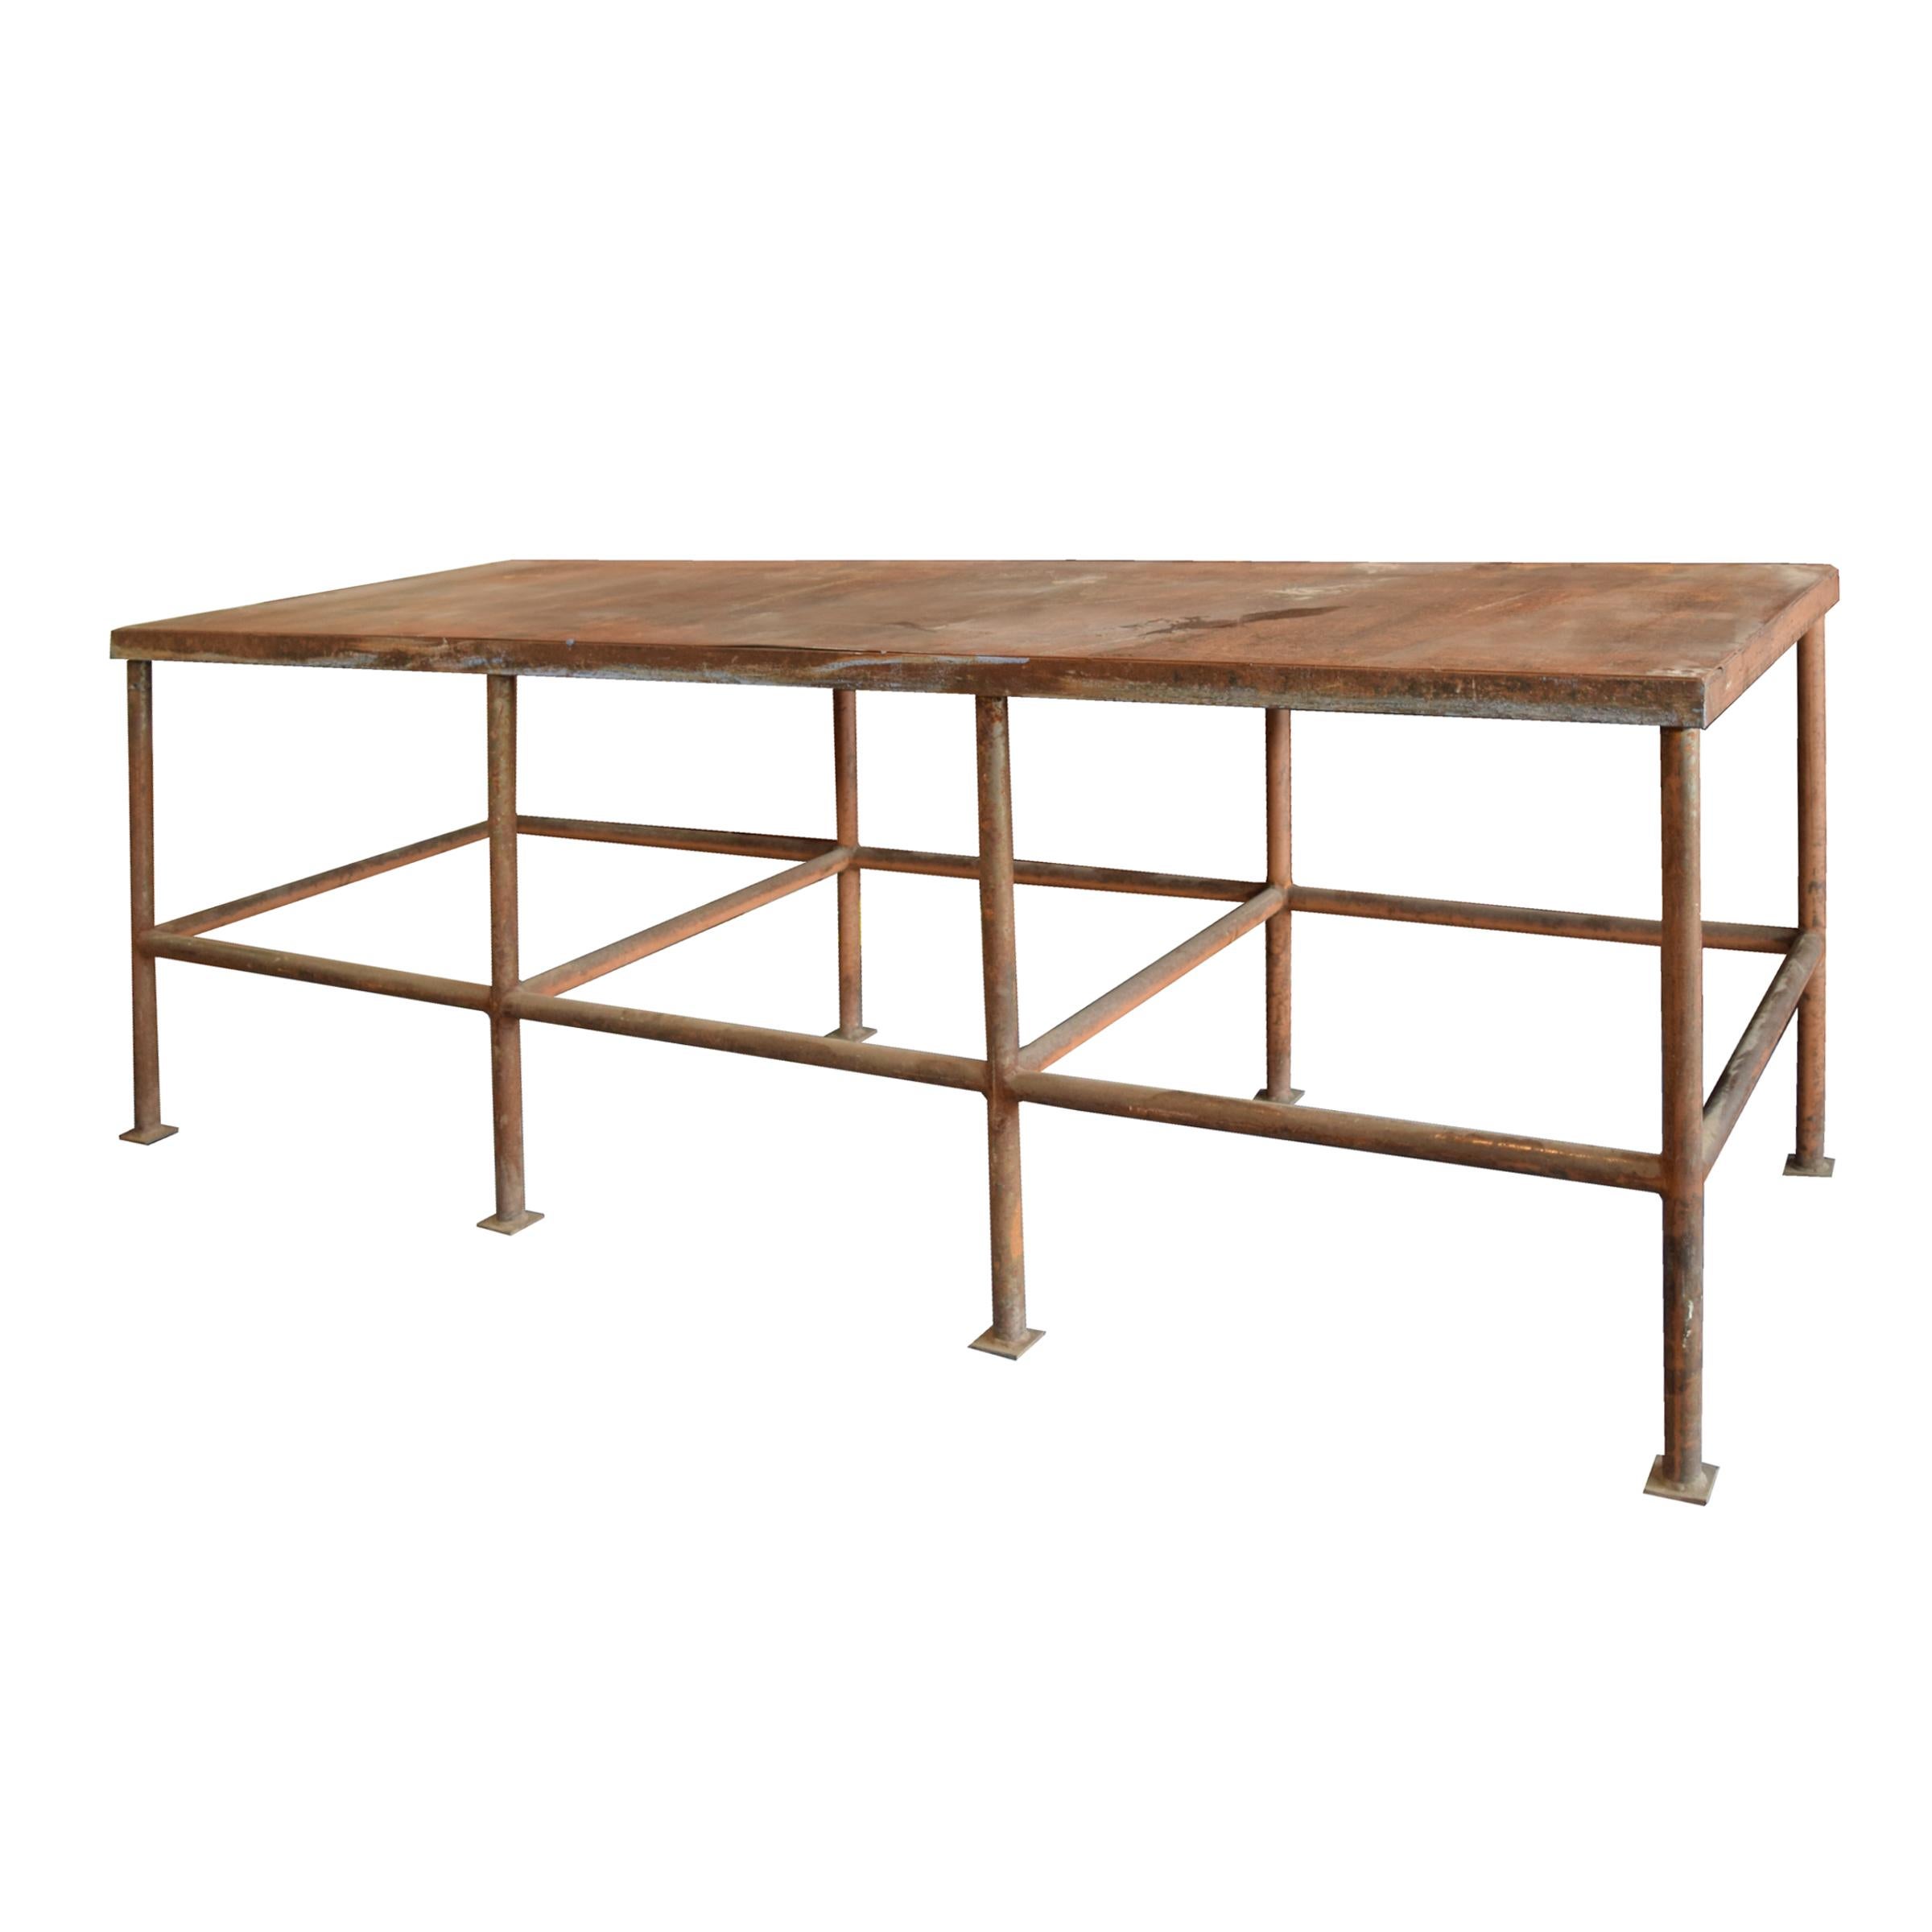 A mid-20th century American industrial steel work table with eight legs.